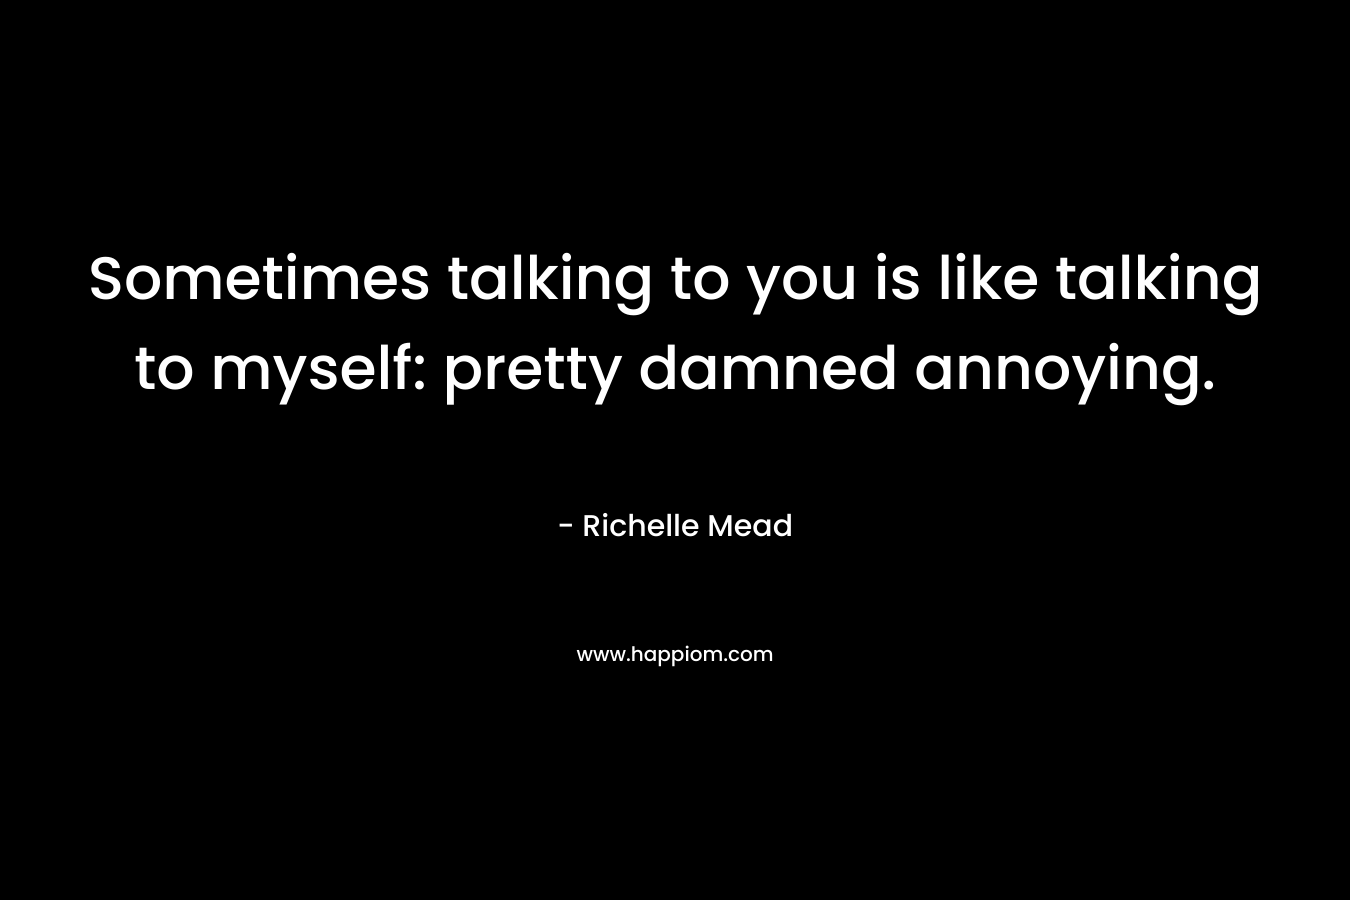 Sometimes talking to you is like talking to myself: pretty damned annoying.